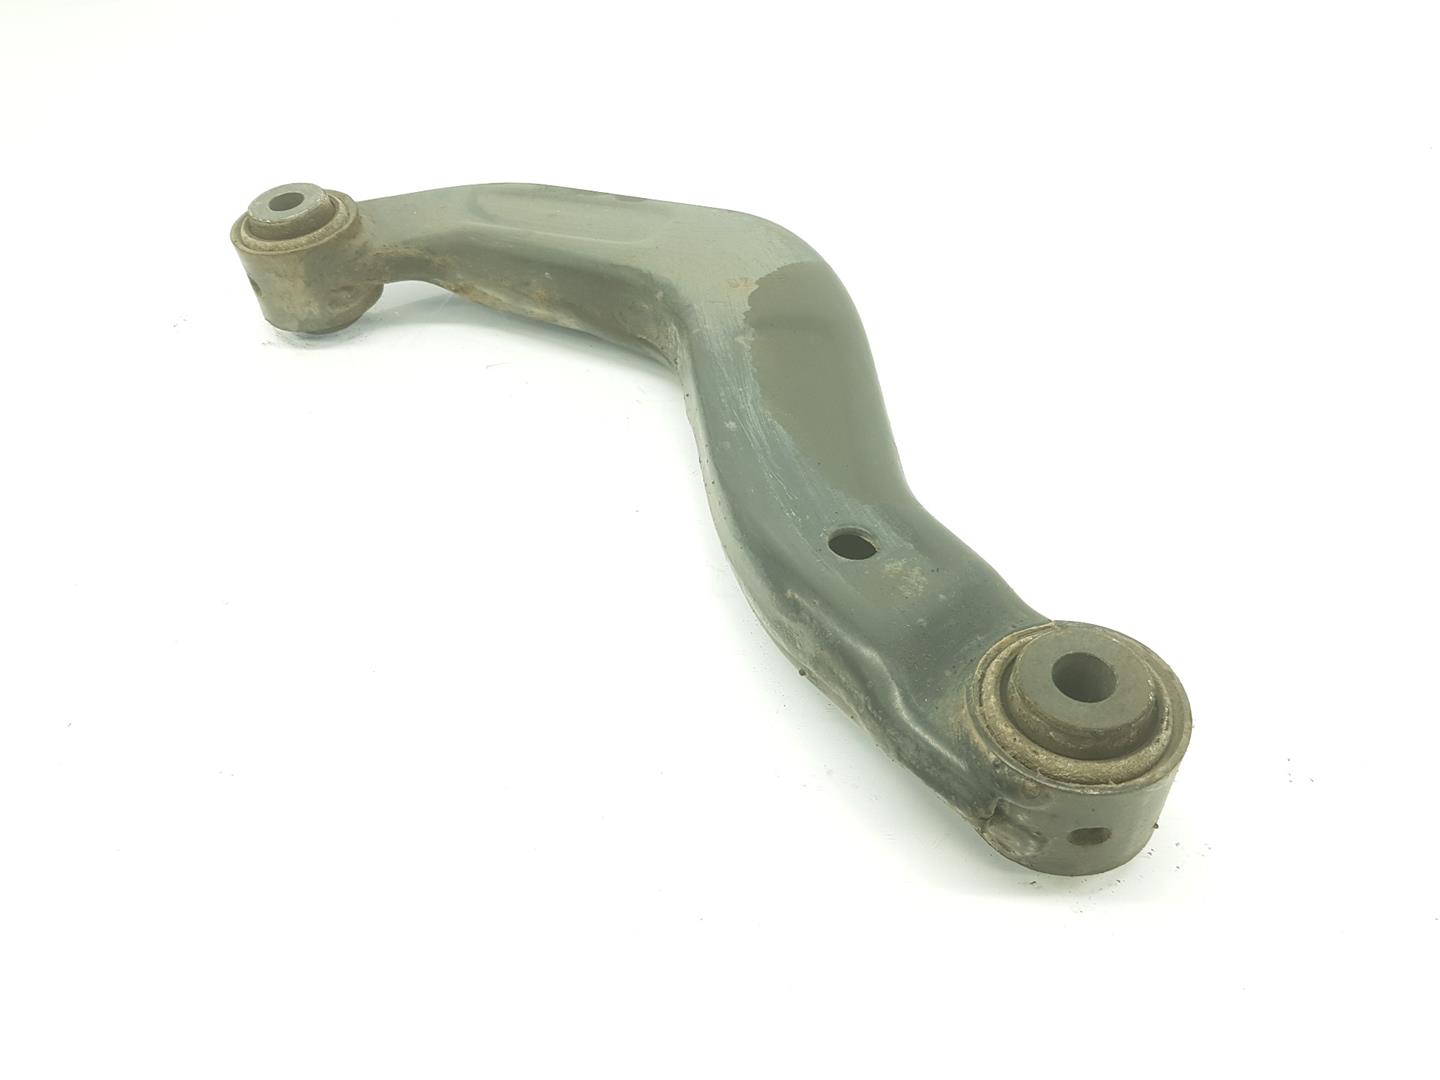 SEAT Exeo 1 generation (2009-2012) Rear Right Arm 3R0505324, 3R0505324 22472105